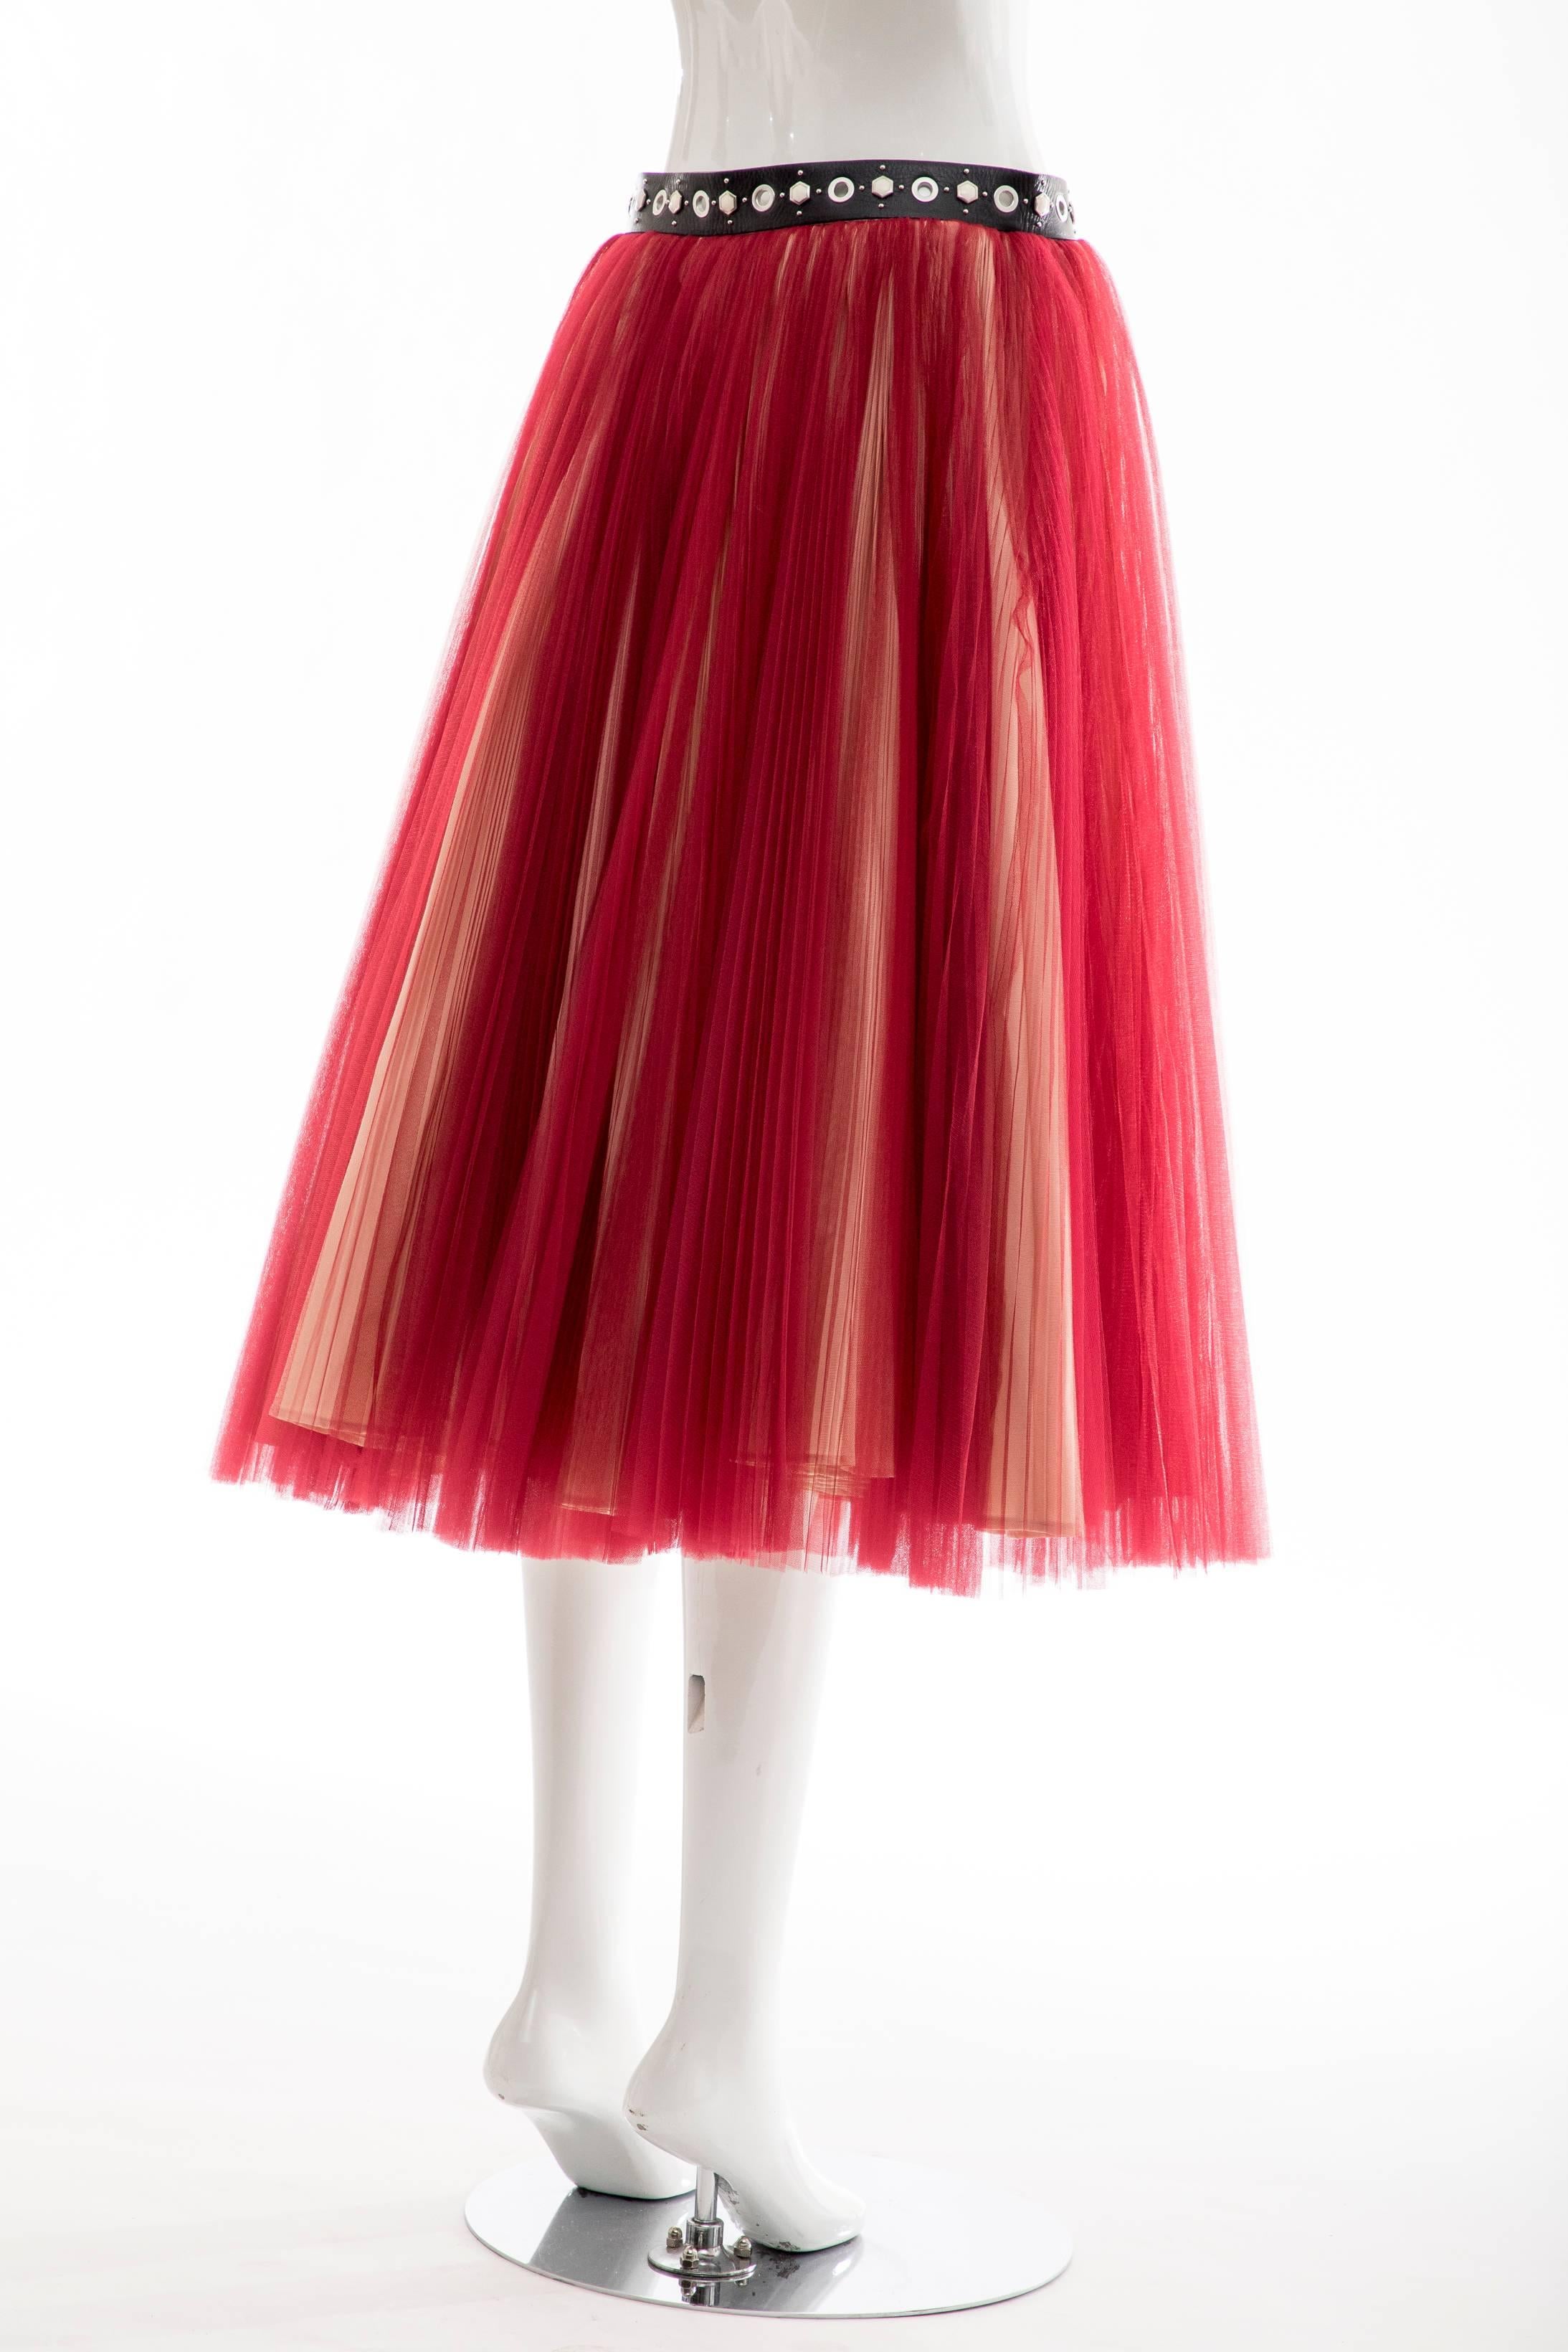 Undercover - Jun Takahashi Red Tulle Silver Pleated Skirt, Spring 2016 3